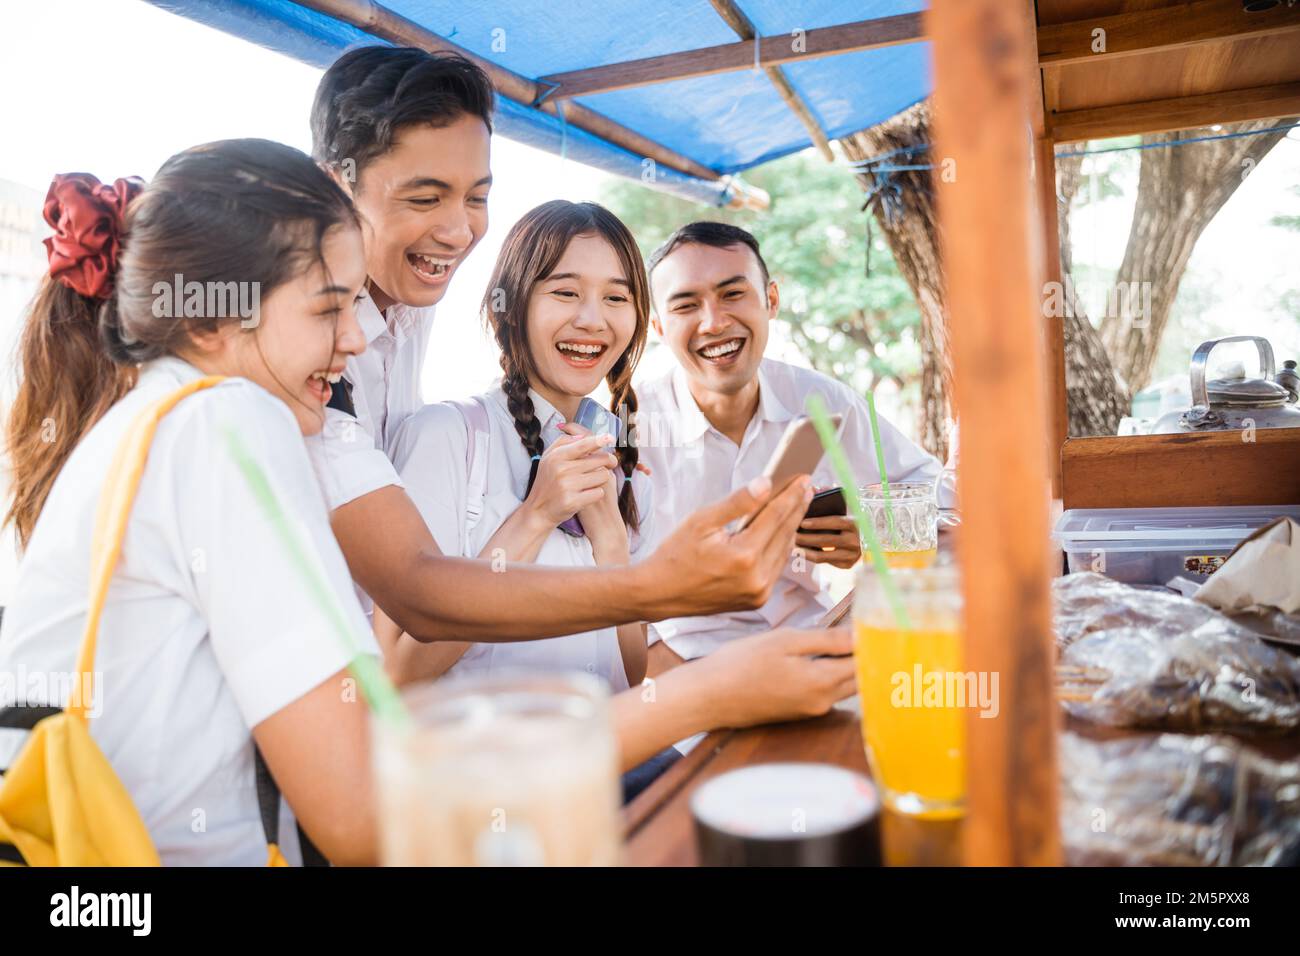 Four high school kids using smartphones together while joking Stock Photo